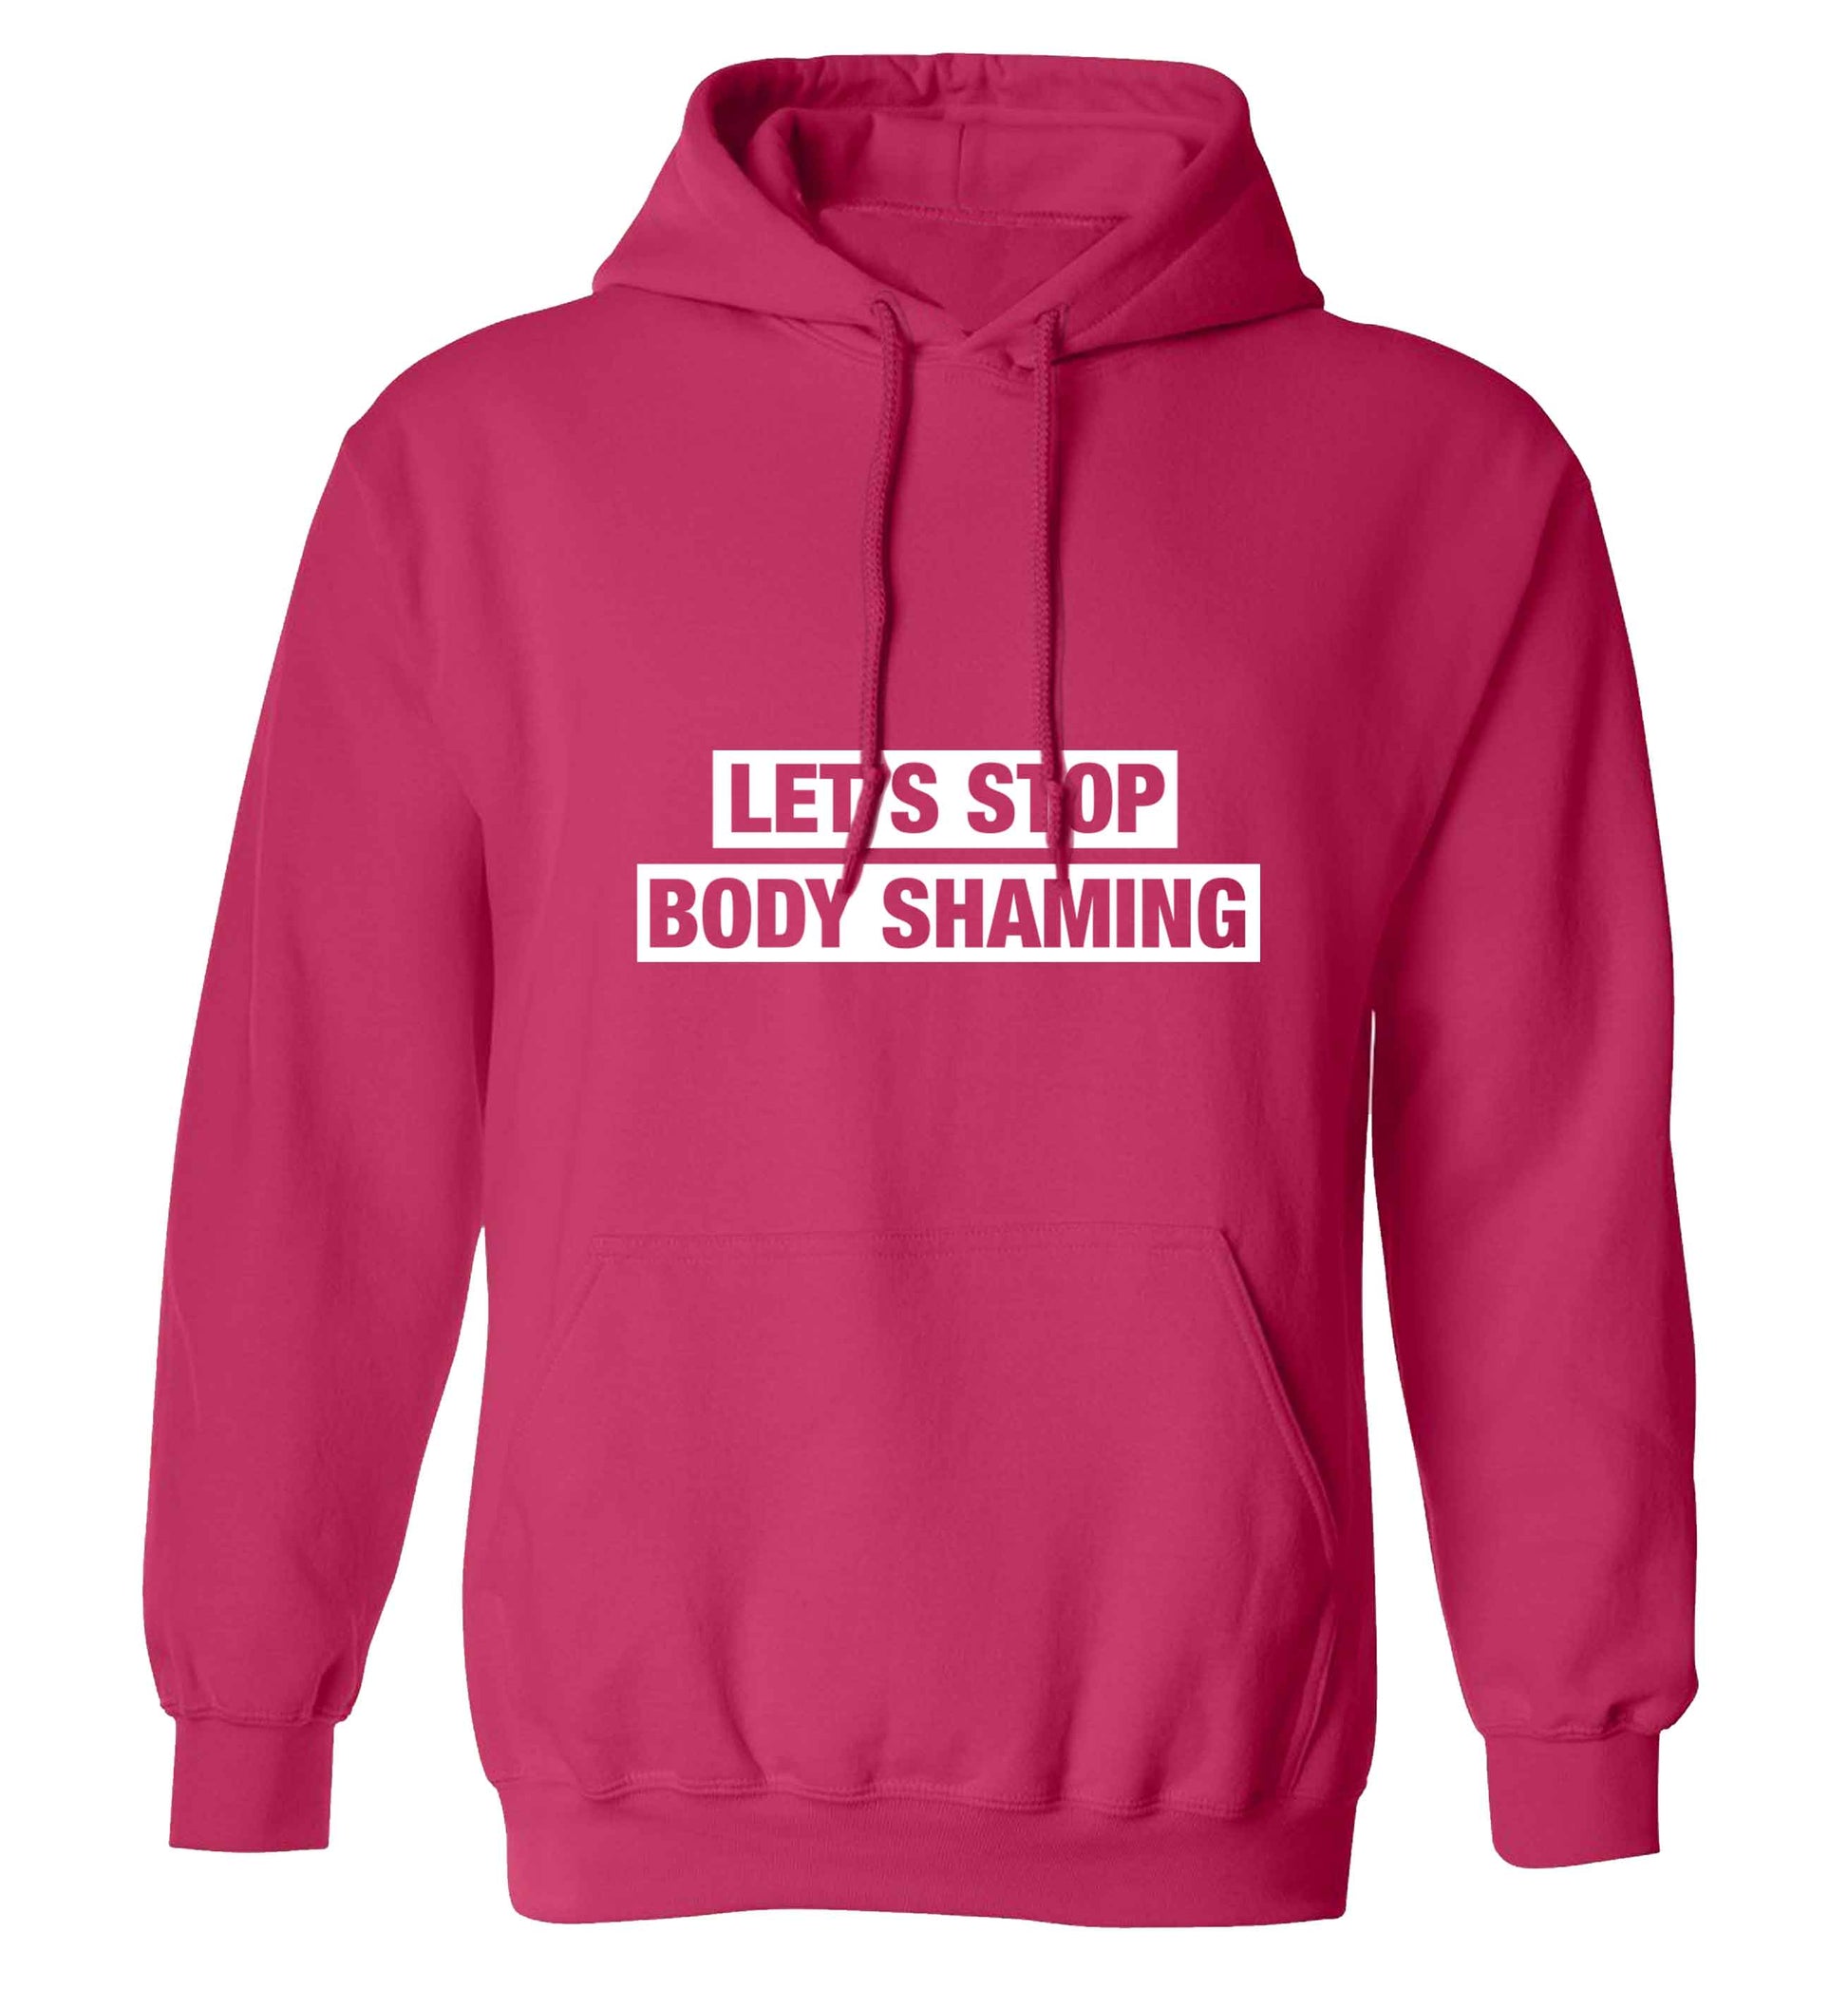 Let's stop body shaming adults unisex pink hoodie 2XL